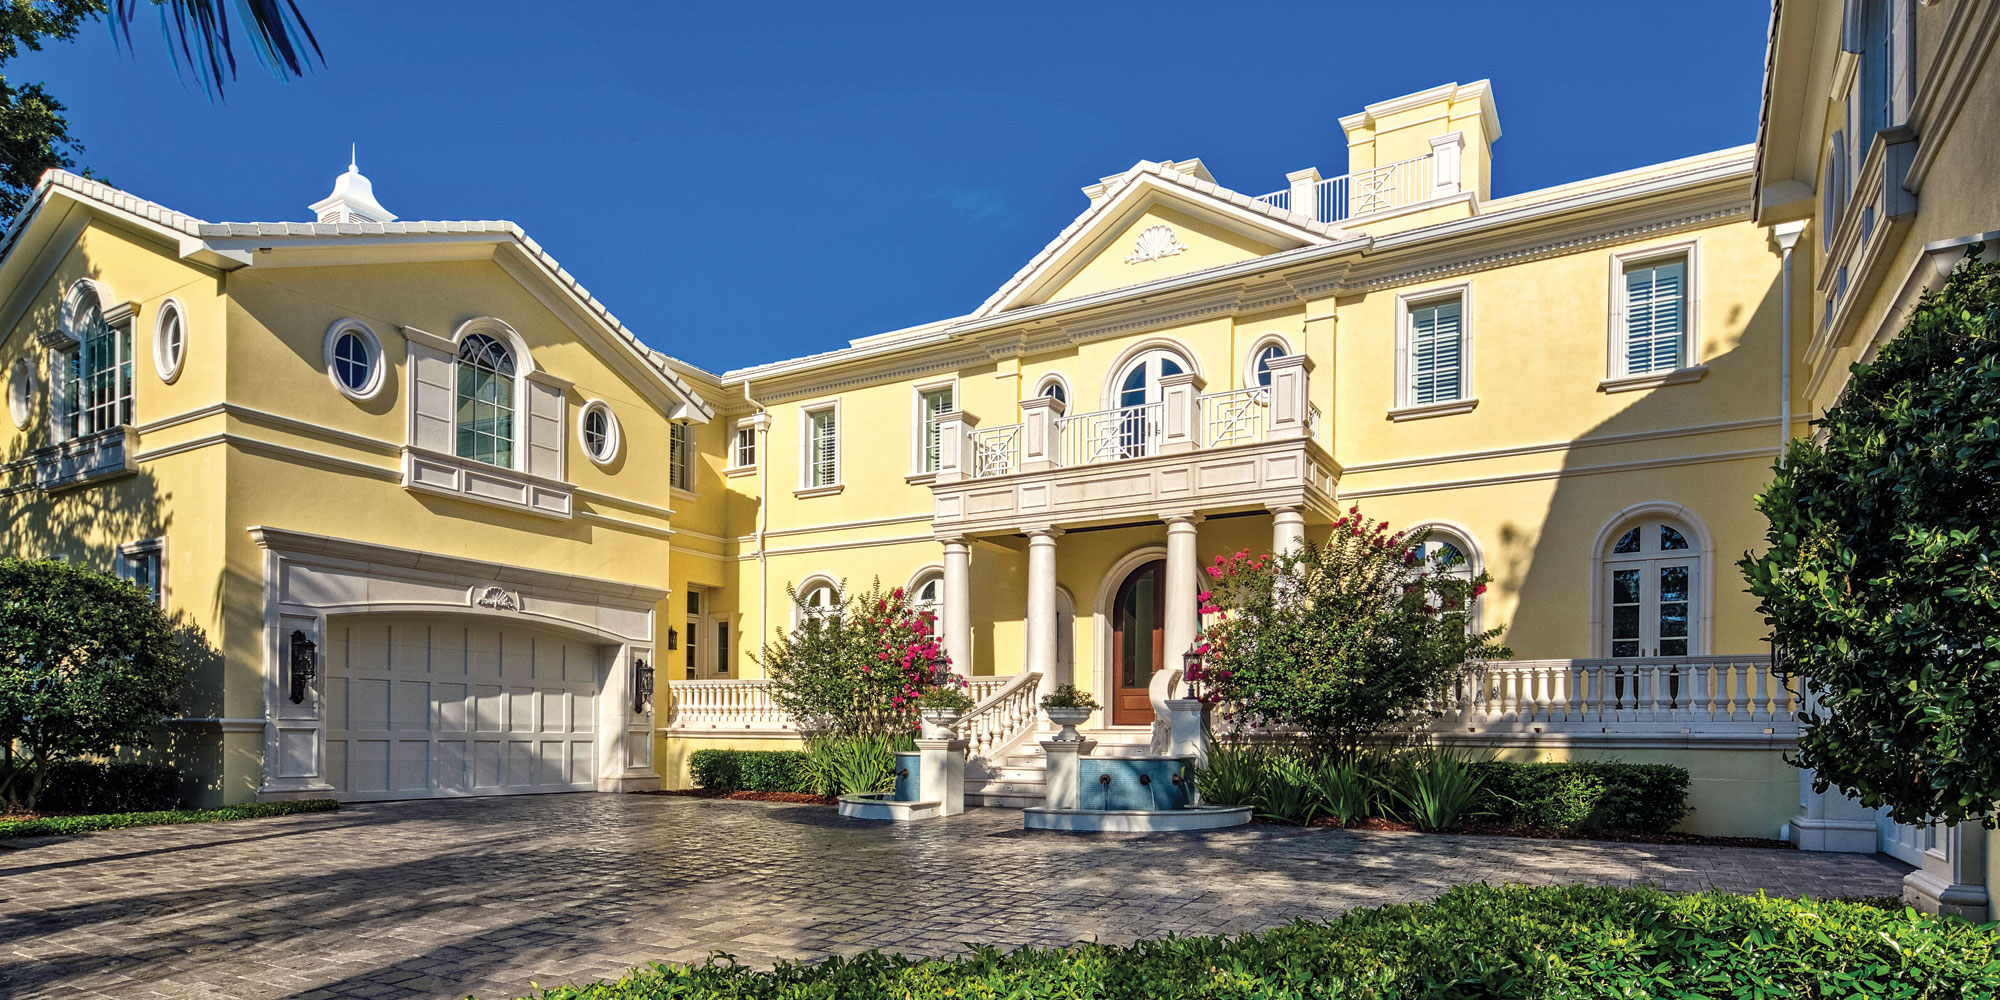 Spanning over 20,000 square feet, this Georgian-style mansion features 10 bedrooms, 15 bathrooms, five kitchens, seven fireplaces, a four-car garage and several covered balconies and loggias among three stories.